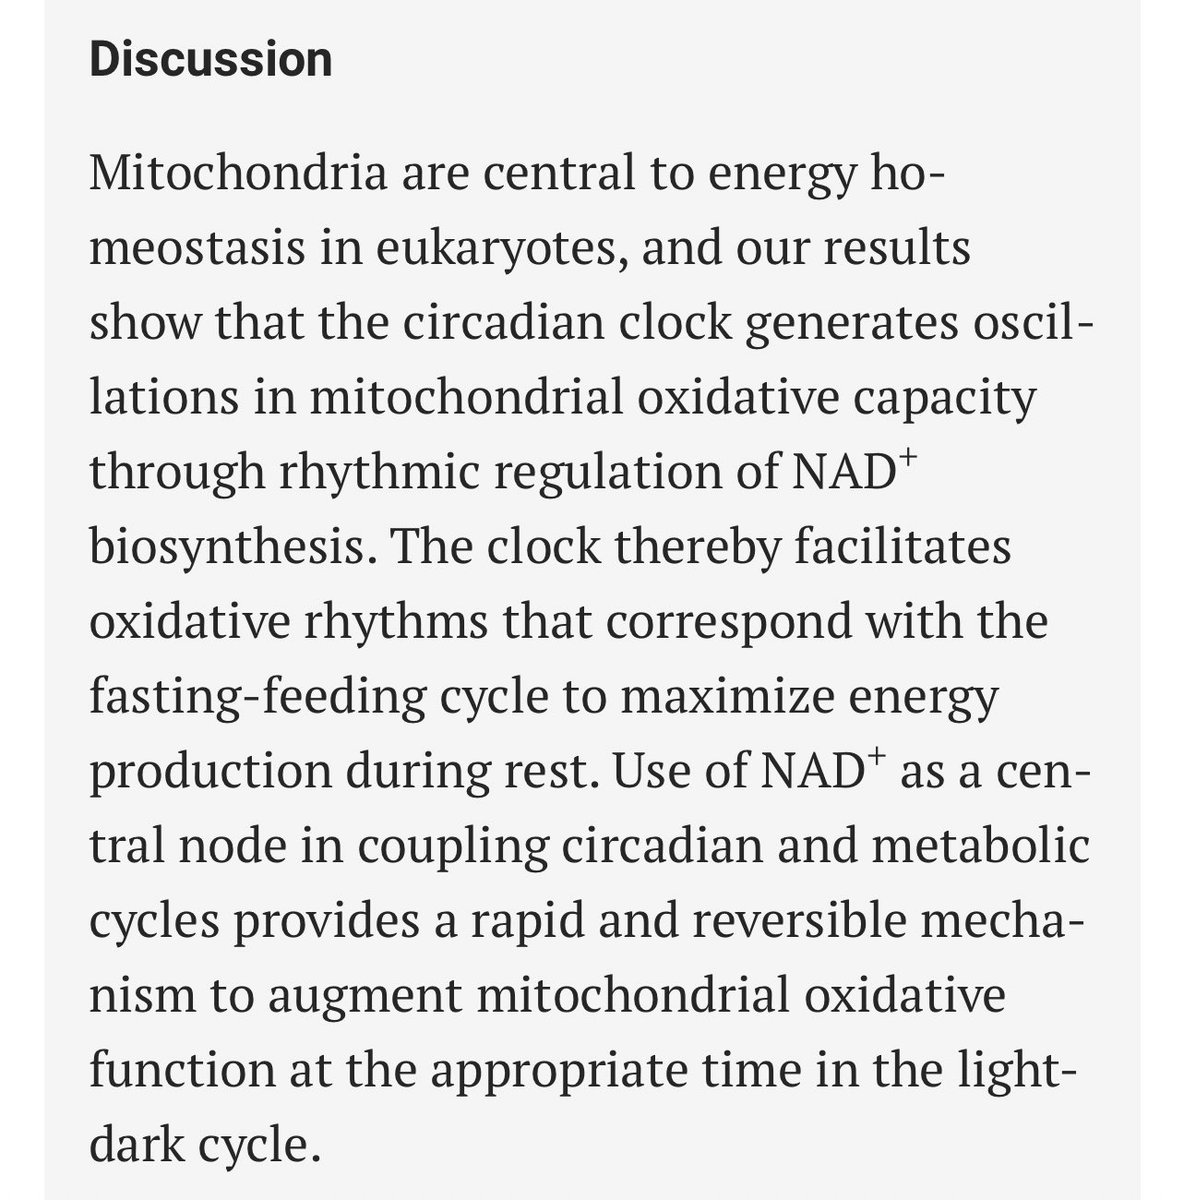 Circadian Clock NAD+ Cycle Drives Mitochondrial Oxidative Metabolism in Mice  https://www.ncbi.nlm.nih.gov/labs/pmc/articles/PMC3963134/